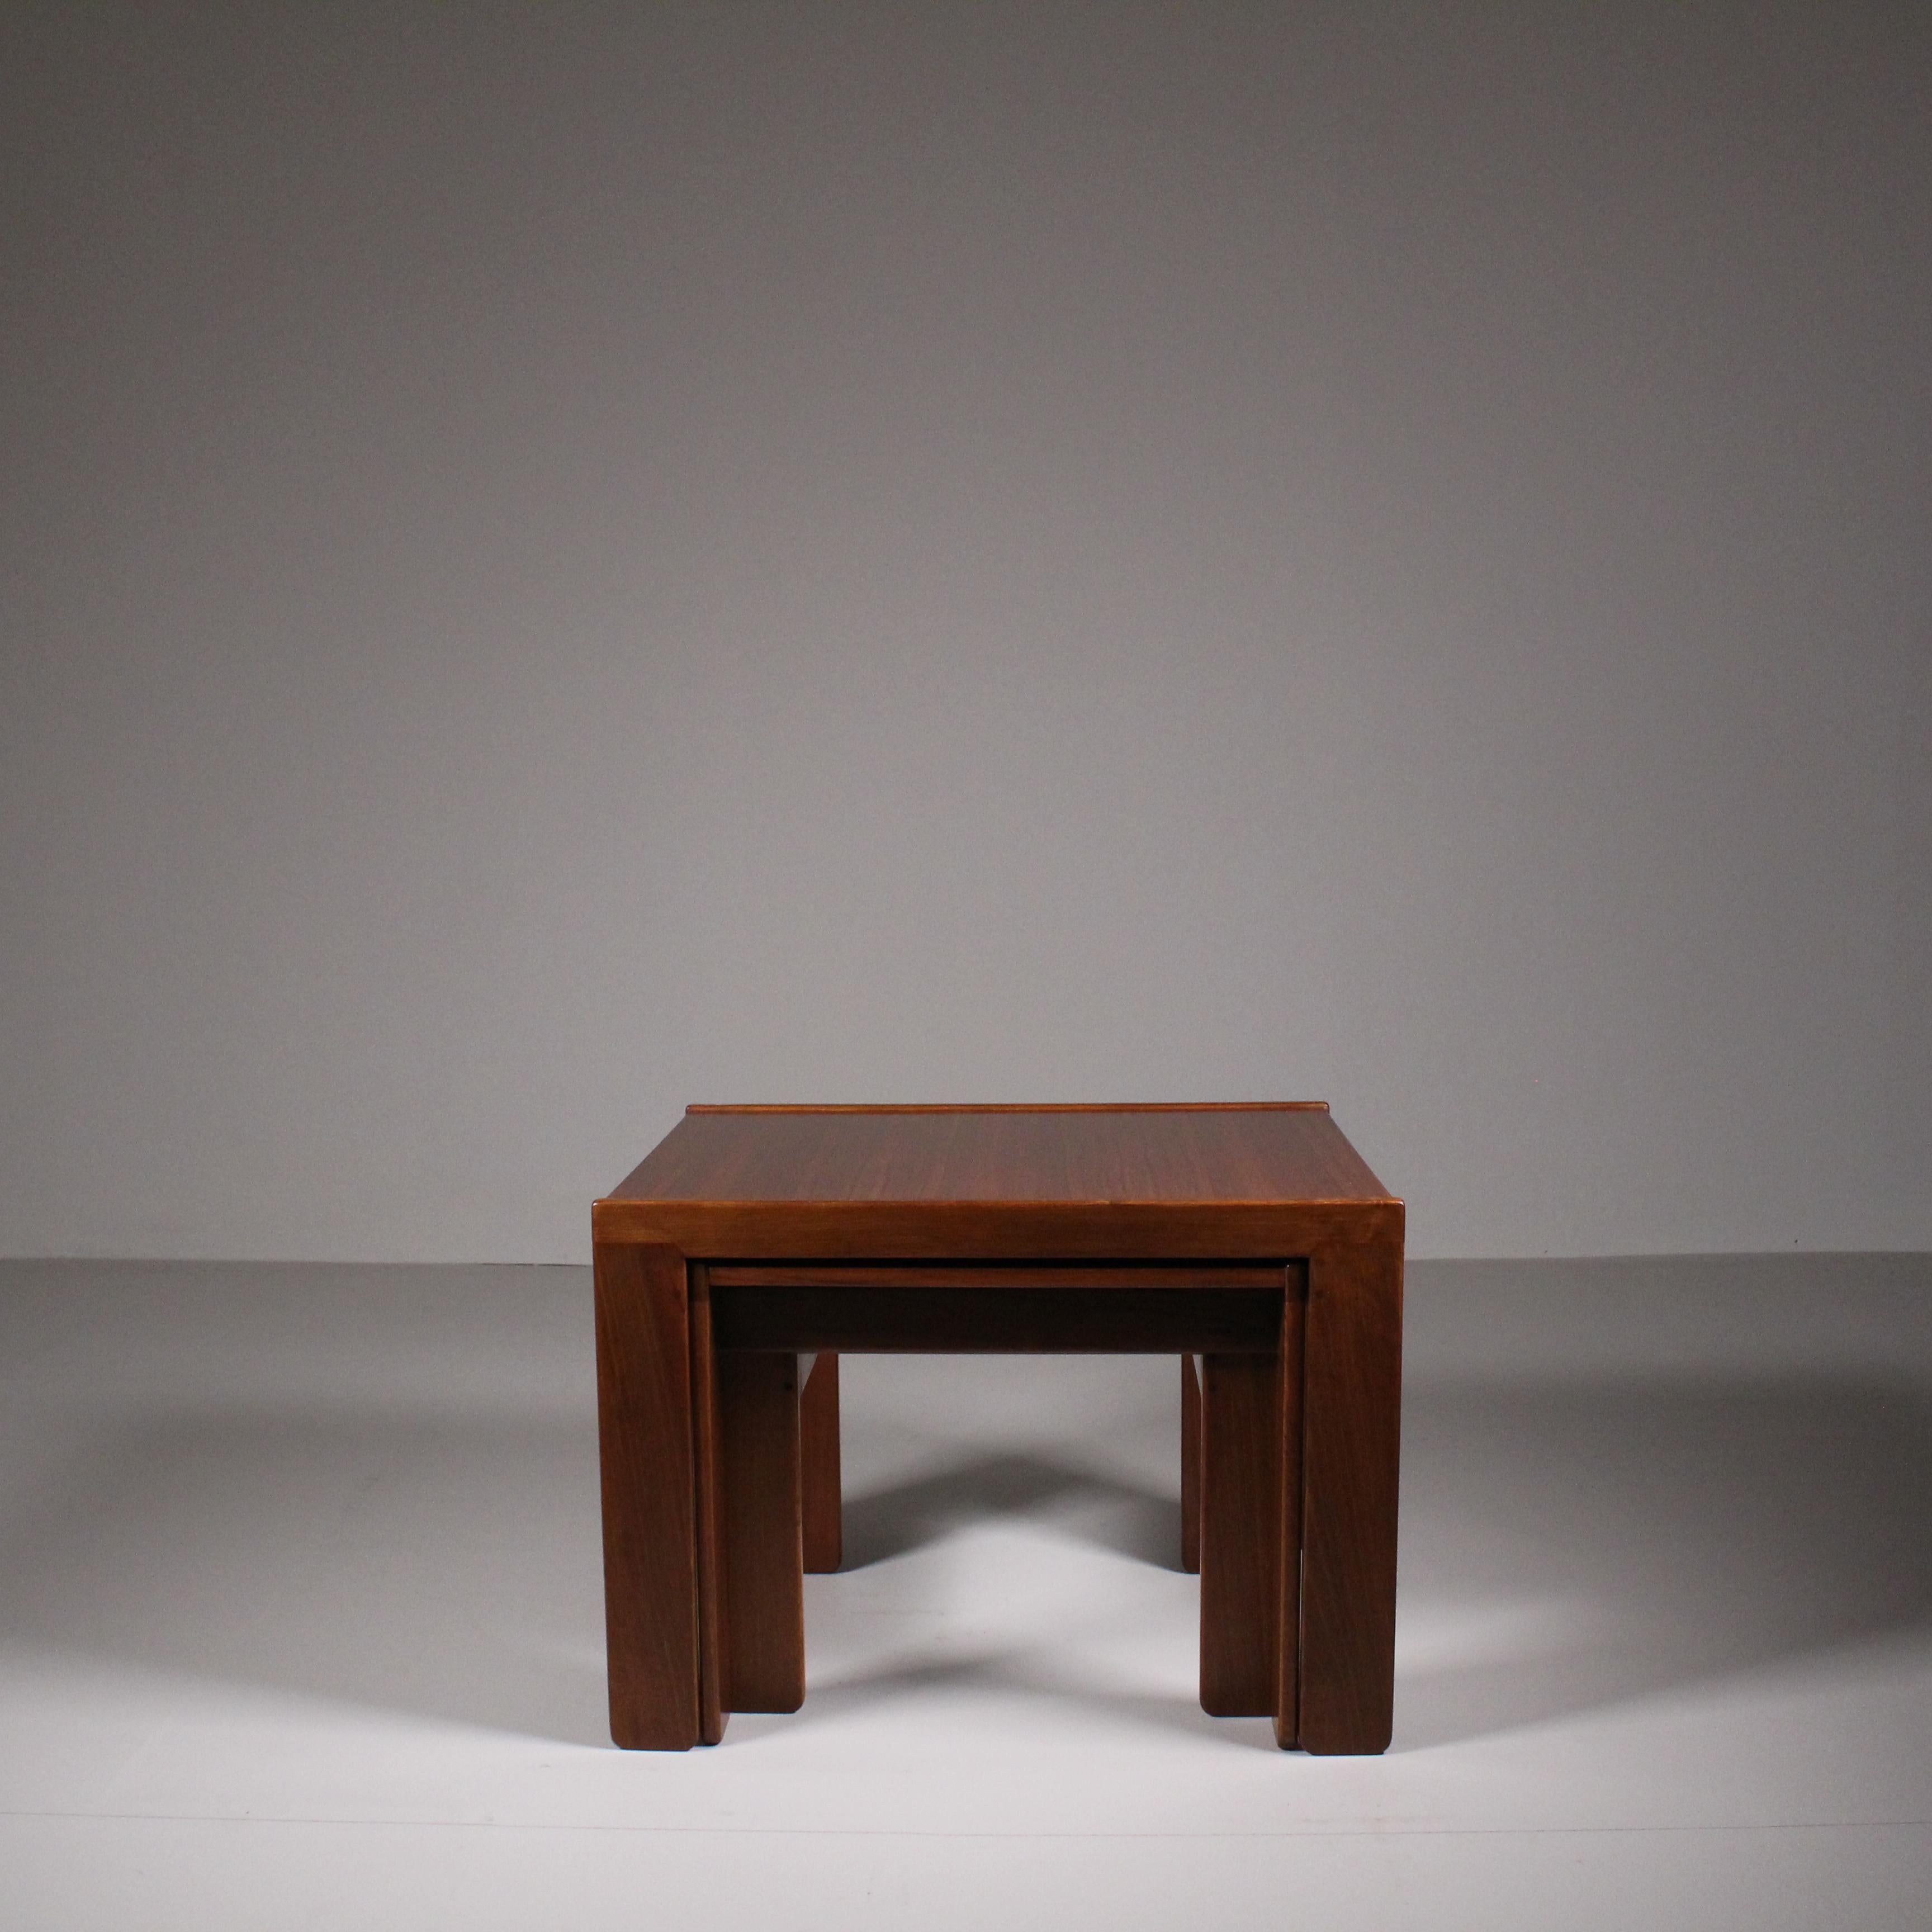 Small tables model 777, Afra and Tobia Scarpa, 1965 Circa For Sale 6